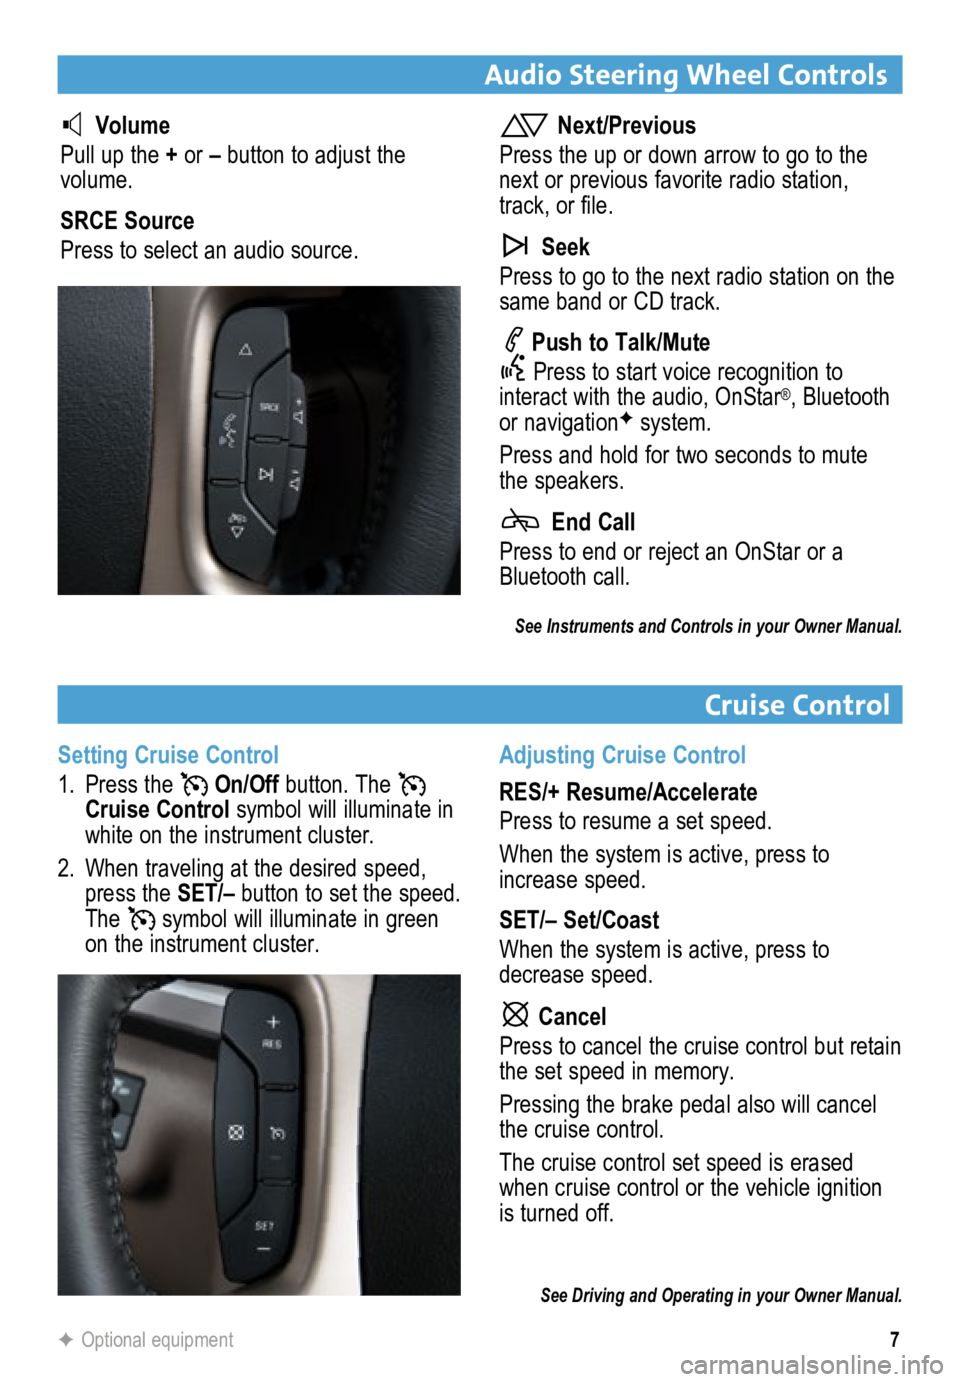 BUICK ENCLAVE 2015  Get To Know Guide 7
Audio Steering Wheel ControlsCruise Control
F Optional equipment
  Volume
Pull up the + or – button to adjust the 
volume.
SRCE Source
Press to select an audio source.  Next/Previous
Press the up 